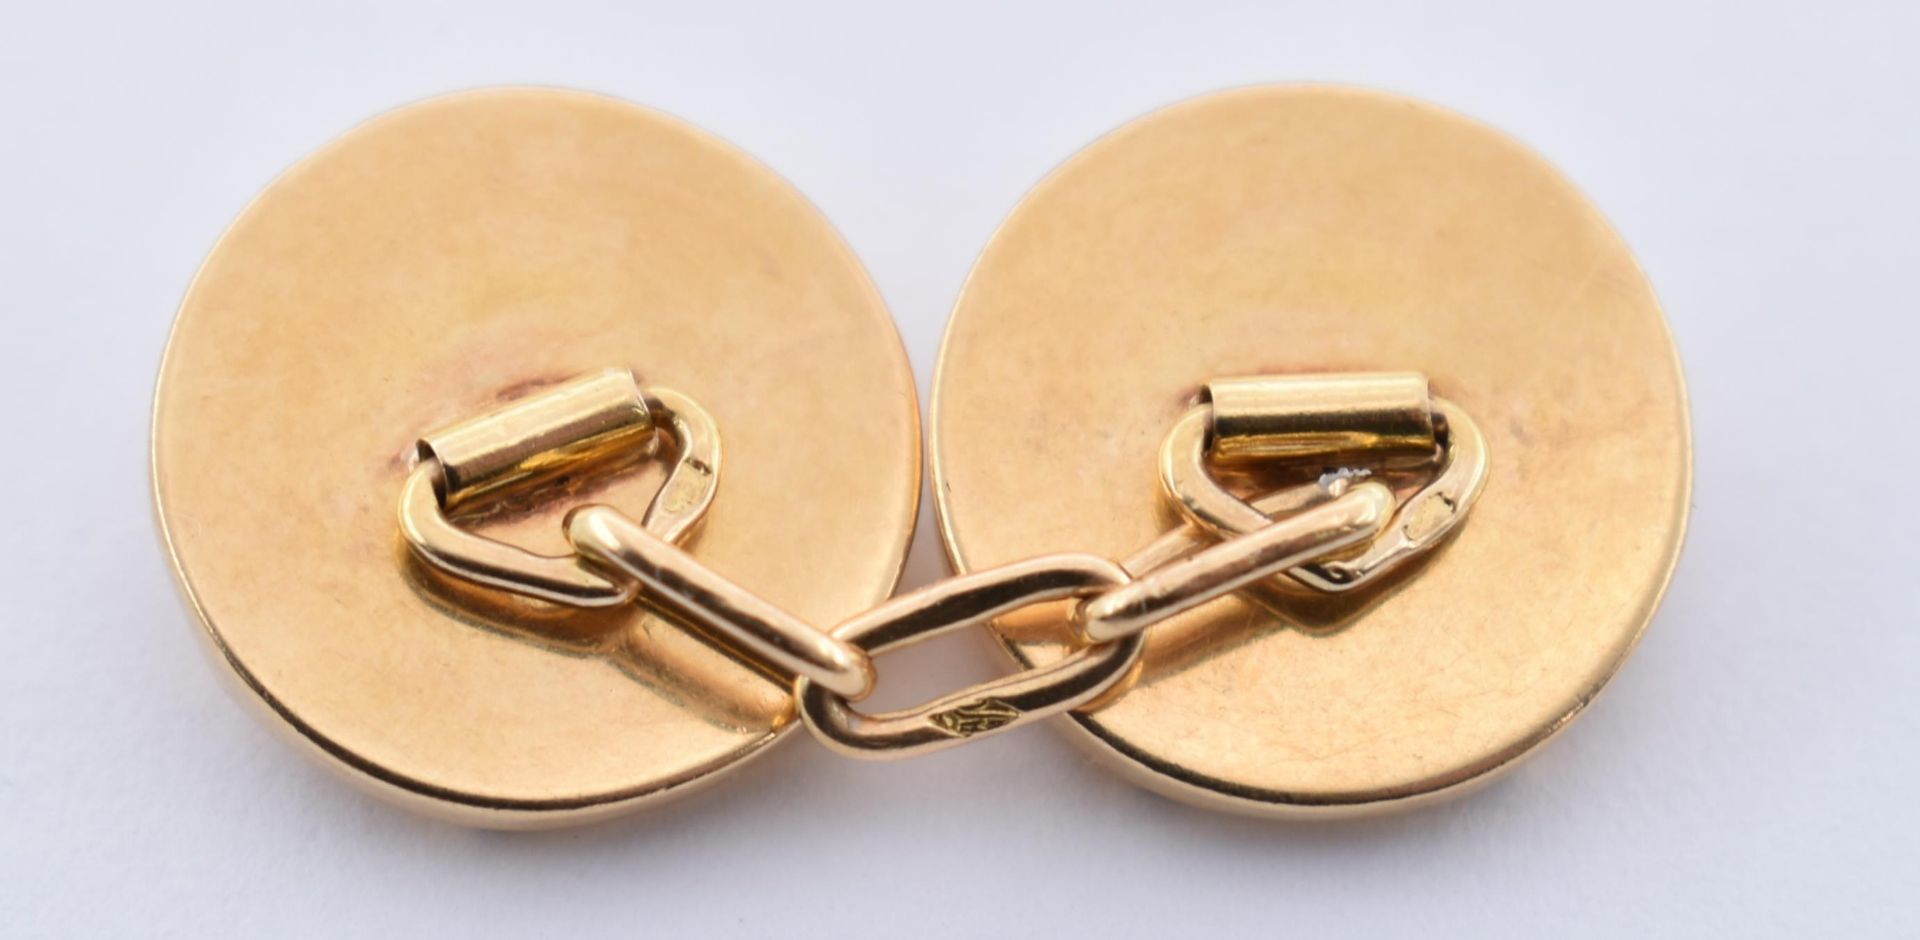 18CT GOLD FRENCH ART DECO CUFFLINKS - Image 6 of 6